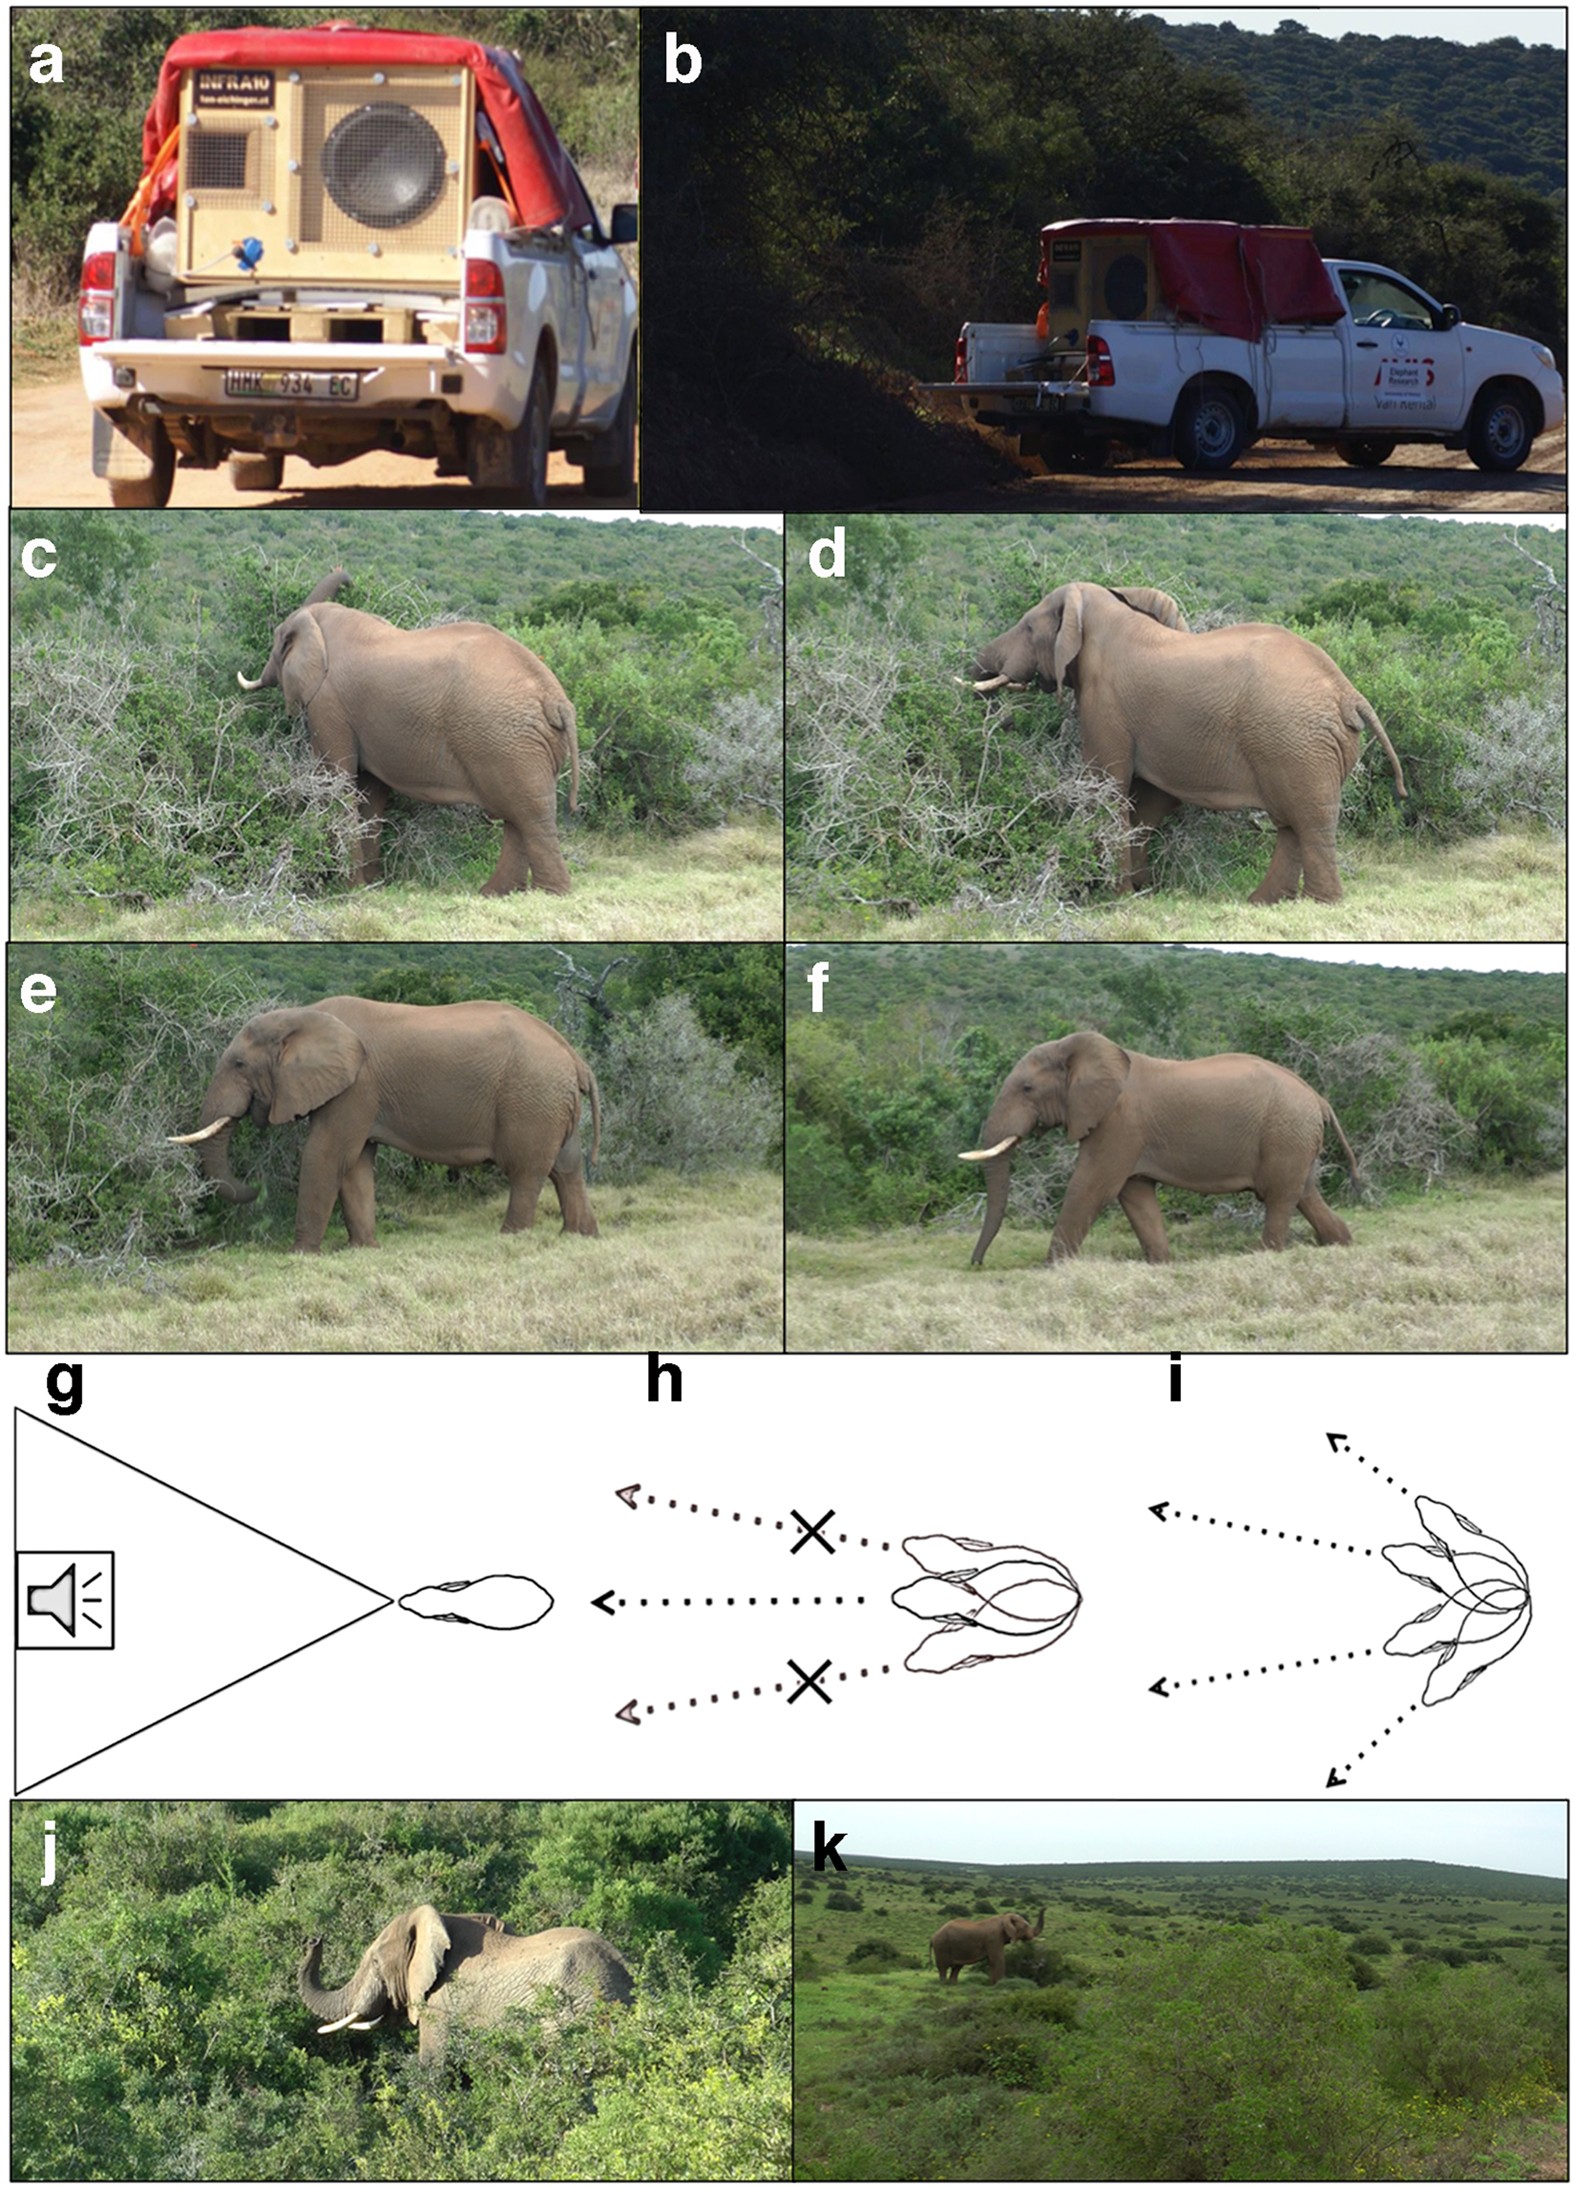 Male African elephants discriminate and prefer vocalizations of unfamiliar females Scientific Reports